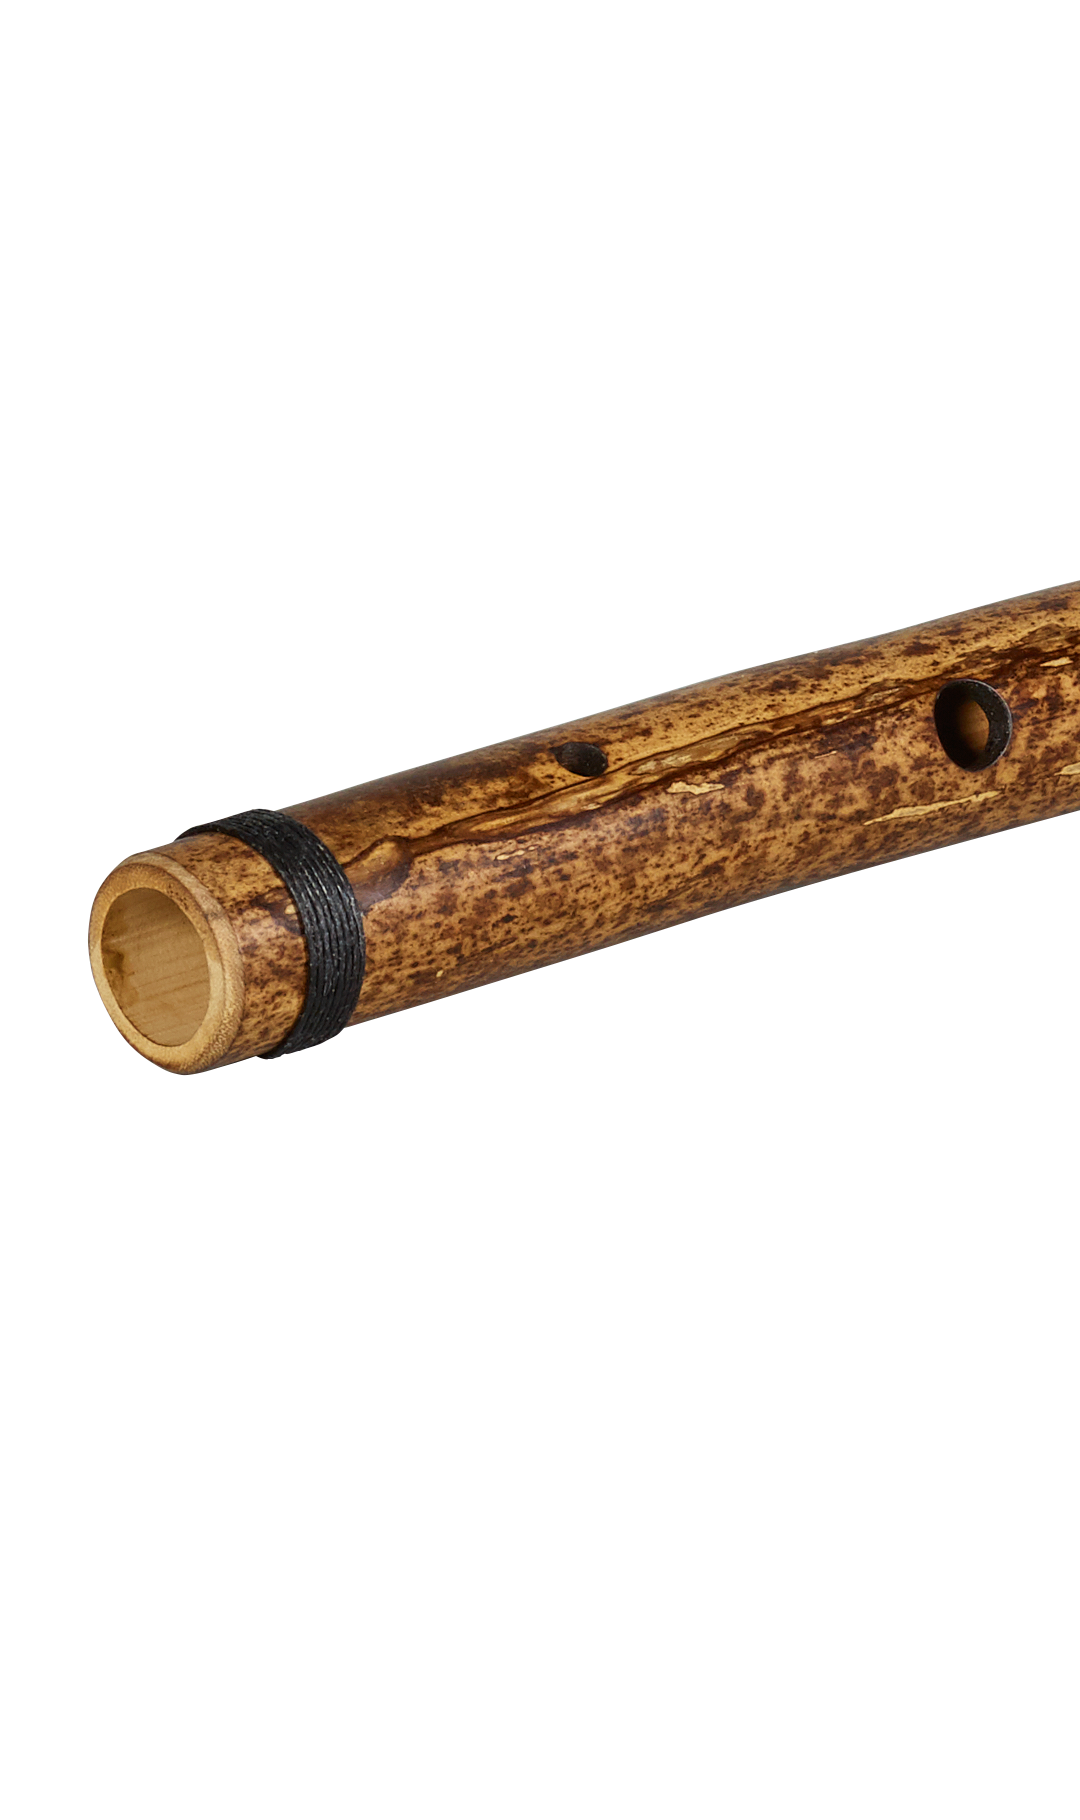 SIDE BLOWN FLUTE Arabian Professionally Tuned in E Bamboo Body Large